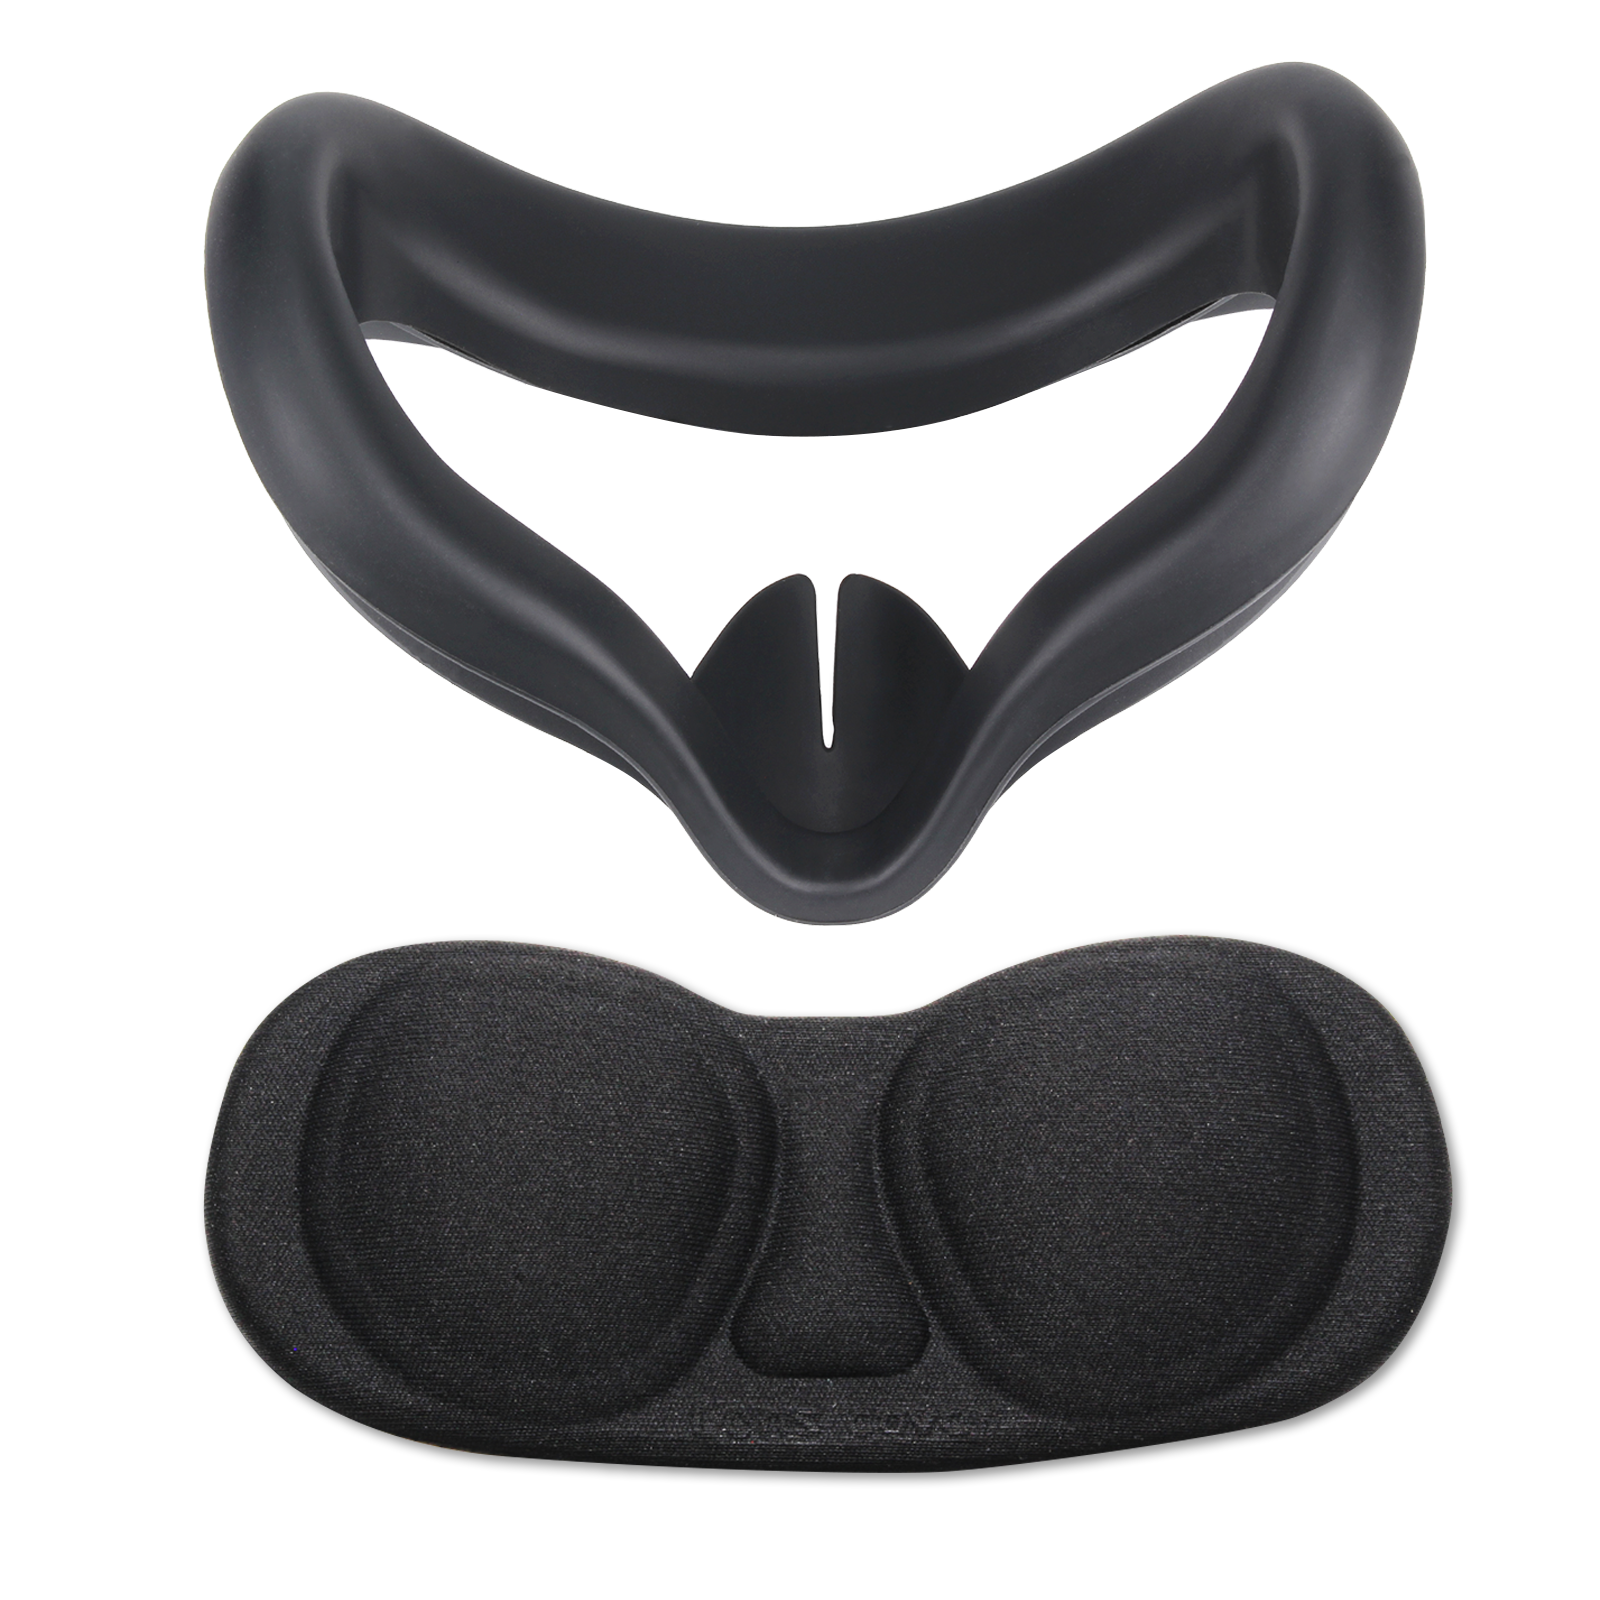 The package includes a VR face mask and a VR lens cushion for added comfort during extended VR sessions